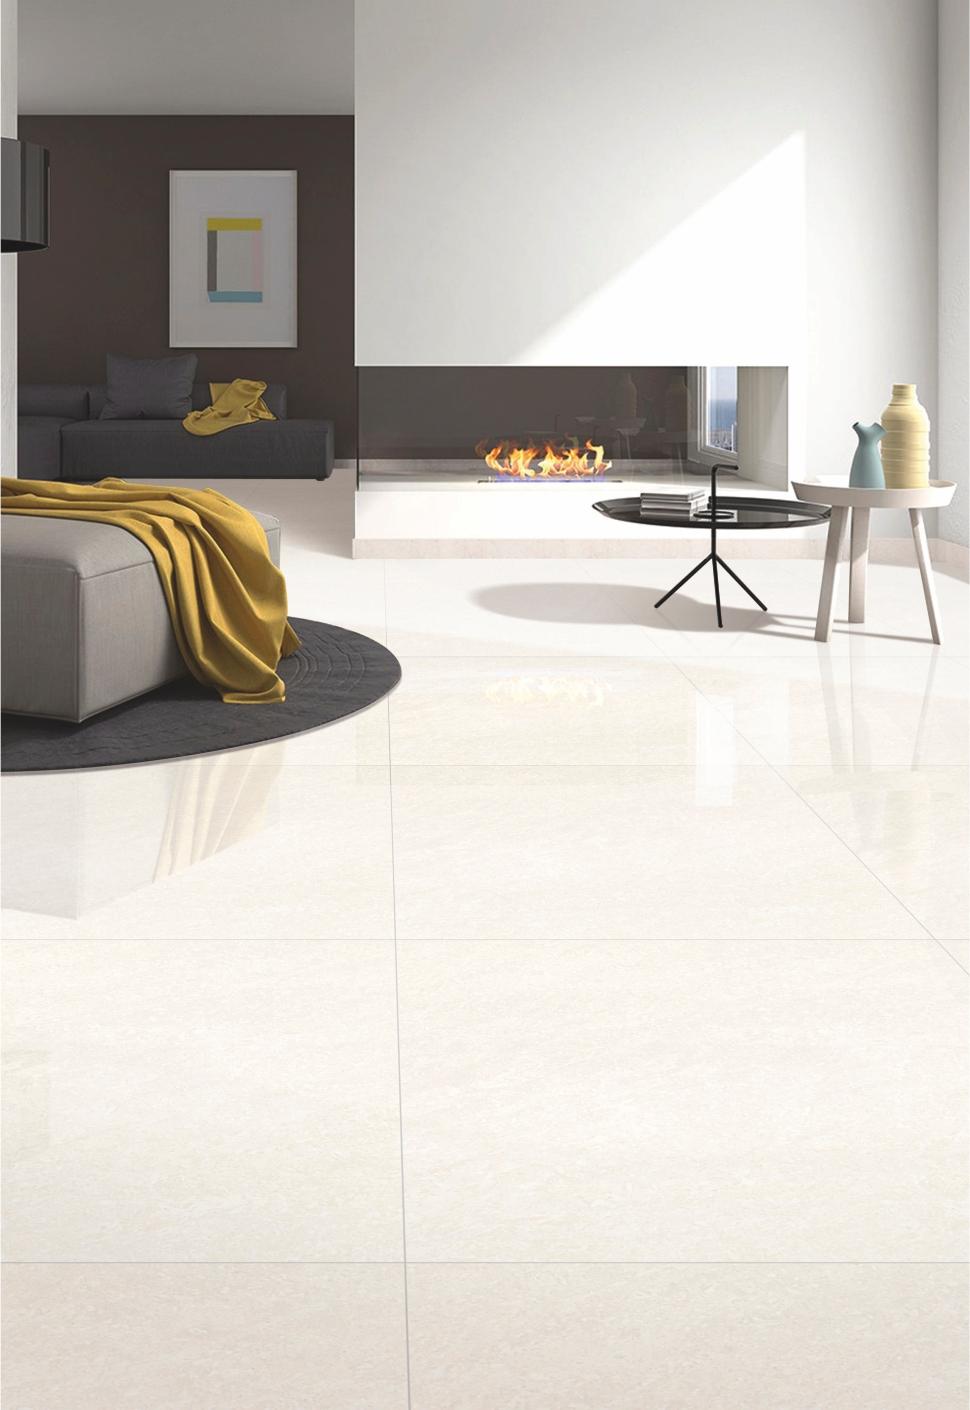 How To Select Tiles For The Living Room, How To Select Floor Tiles For Living Room